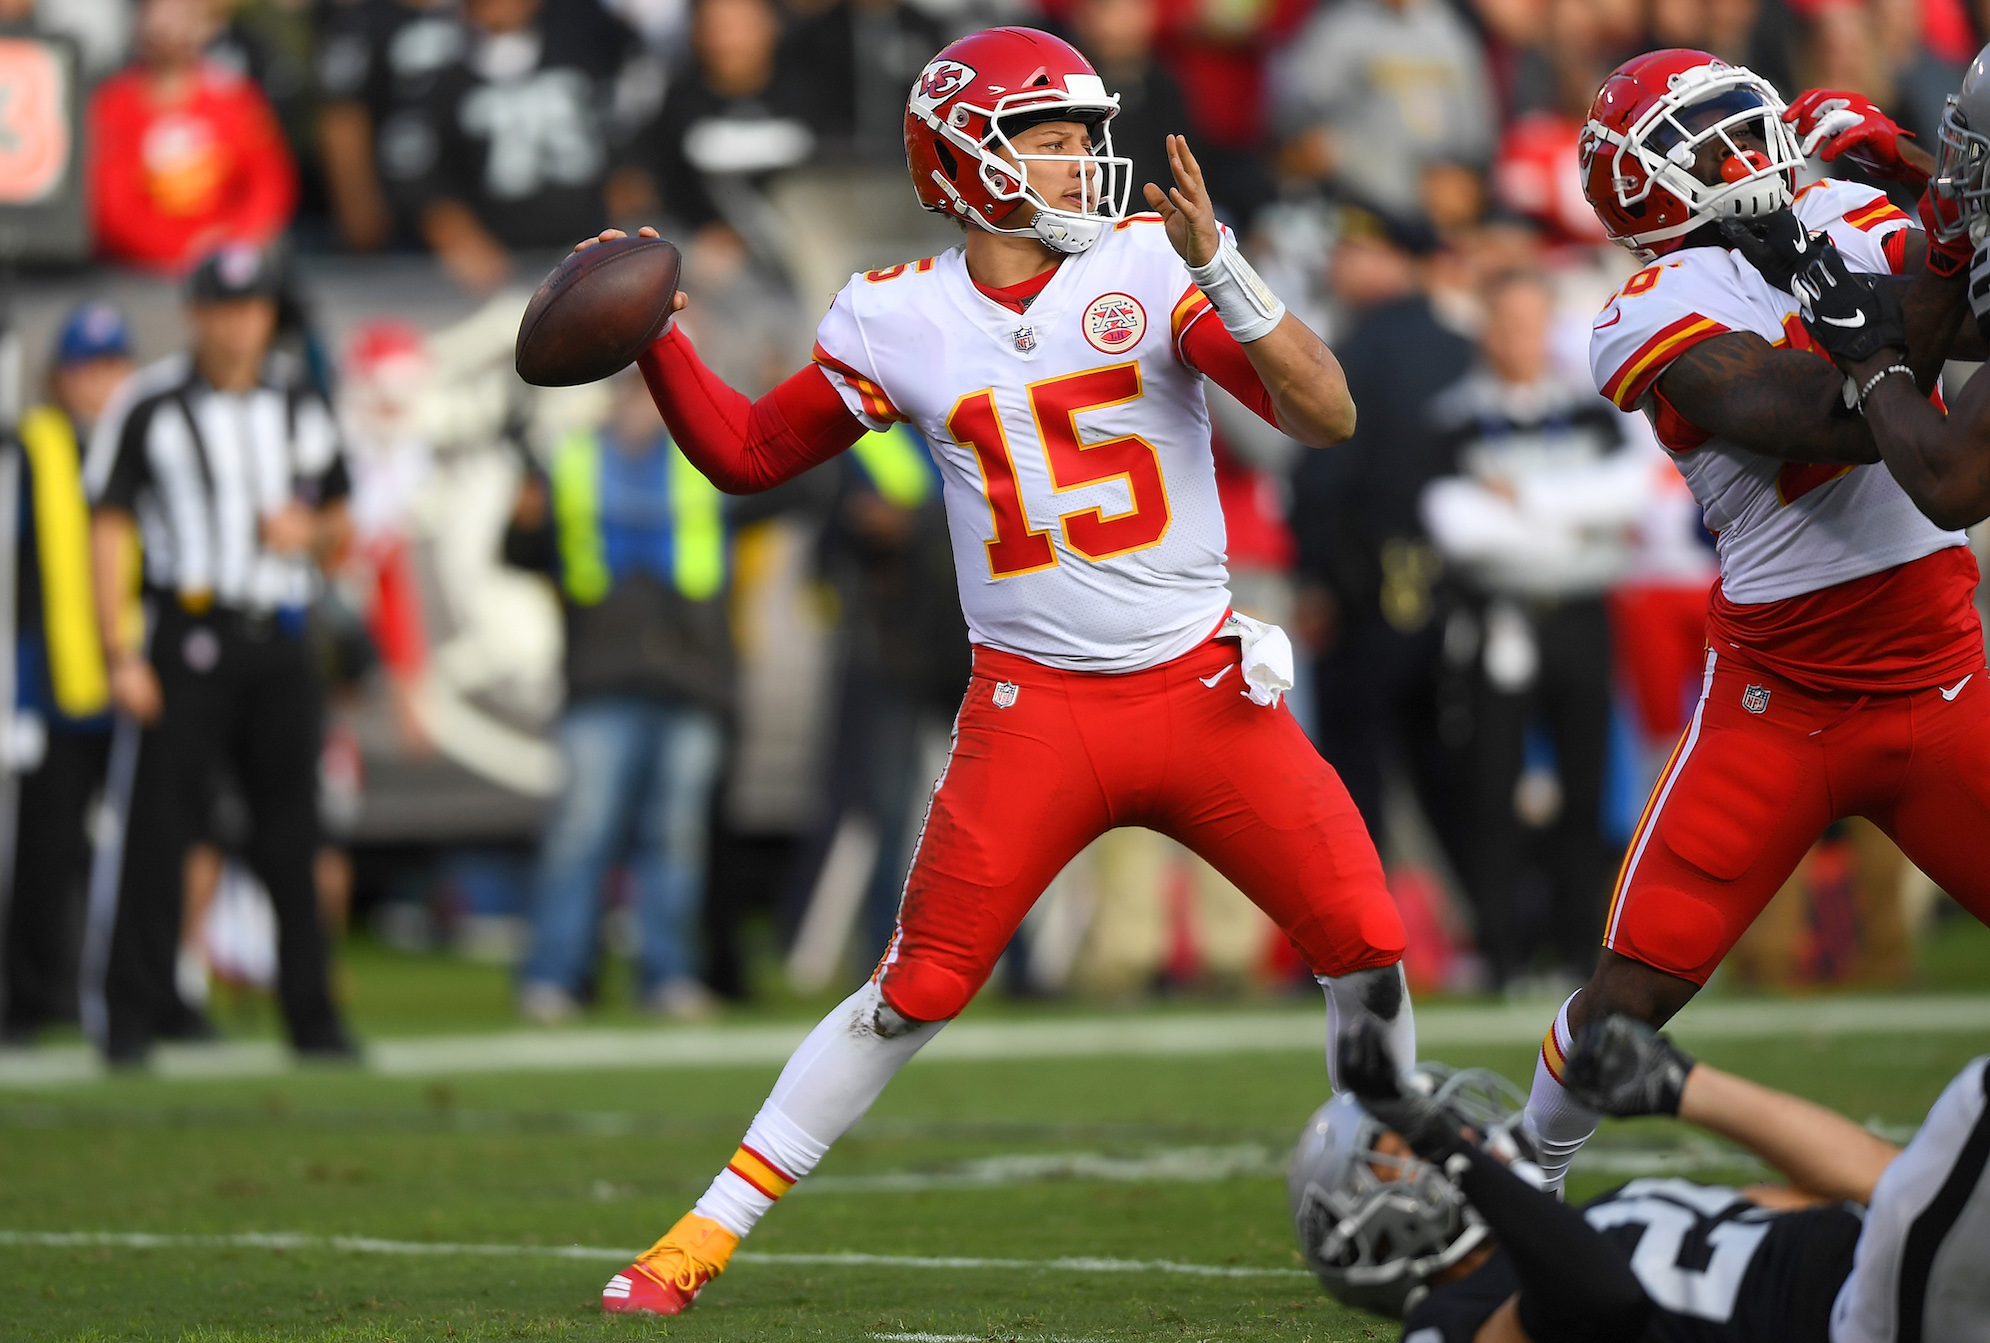 Patrick Mahomes might be the most gifted QB in NFL history, and now he's adding a never-before-seen wrinkle to his passing game.